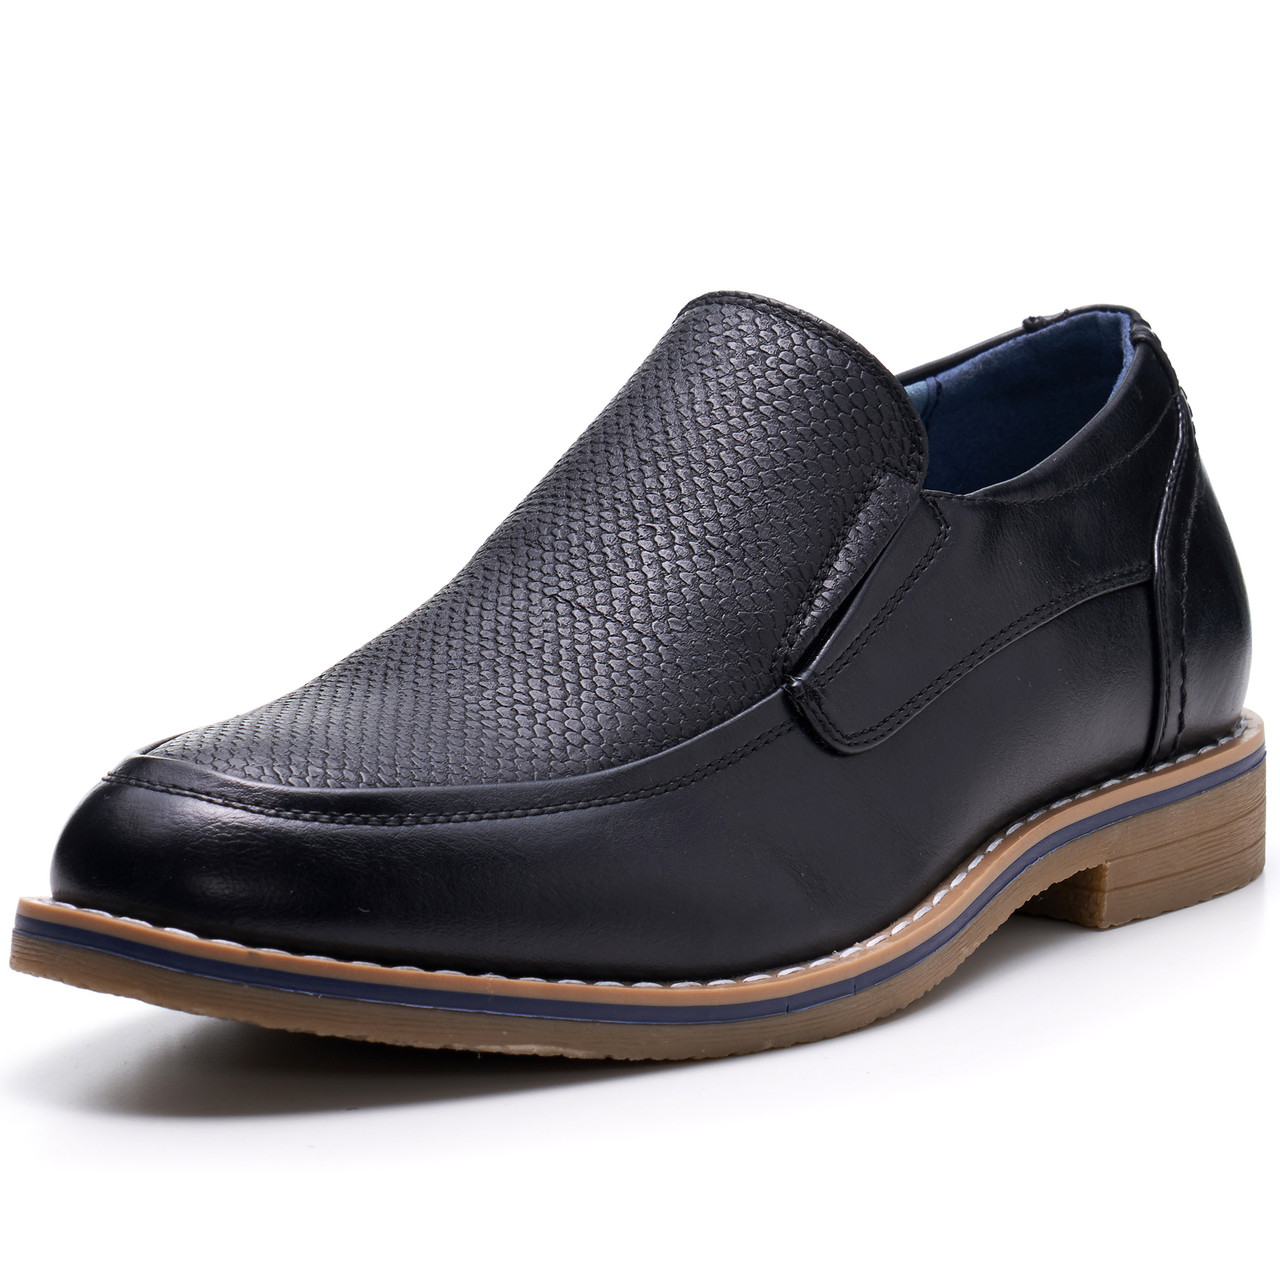 loafer style men's shoes